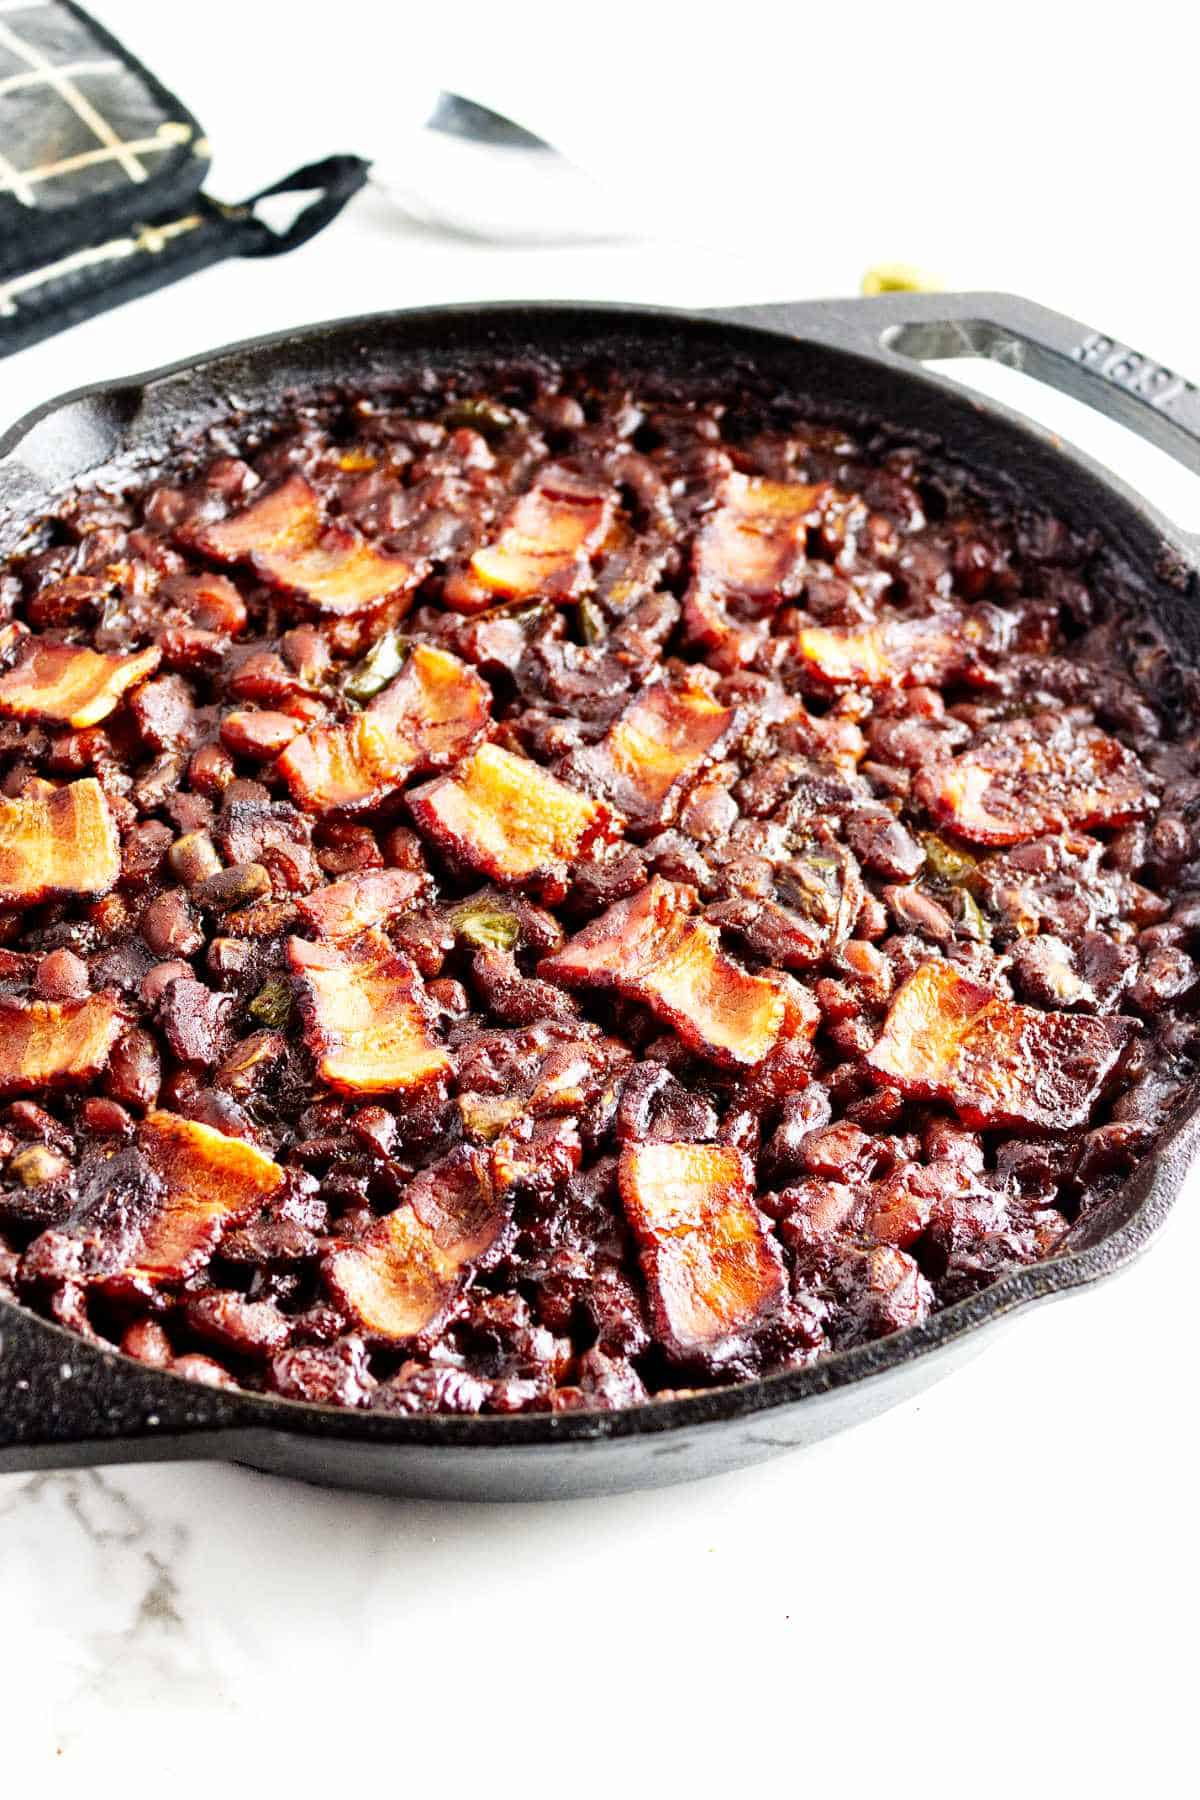 summer favorites: smoked baked beans.